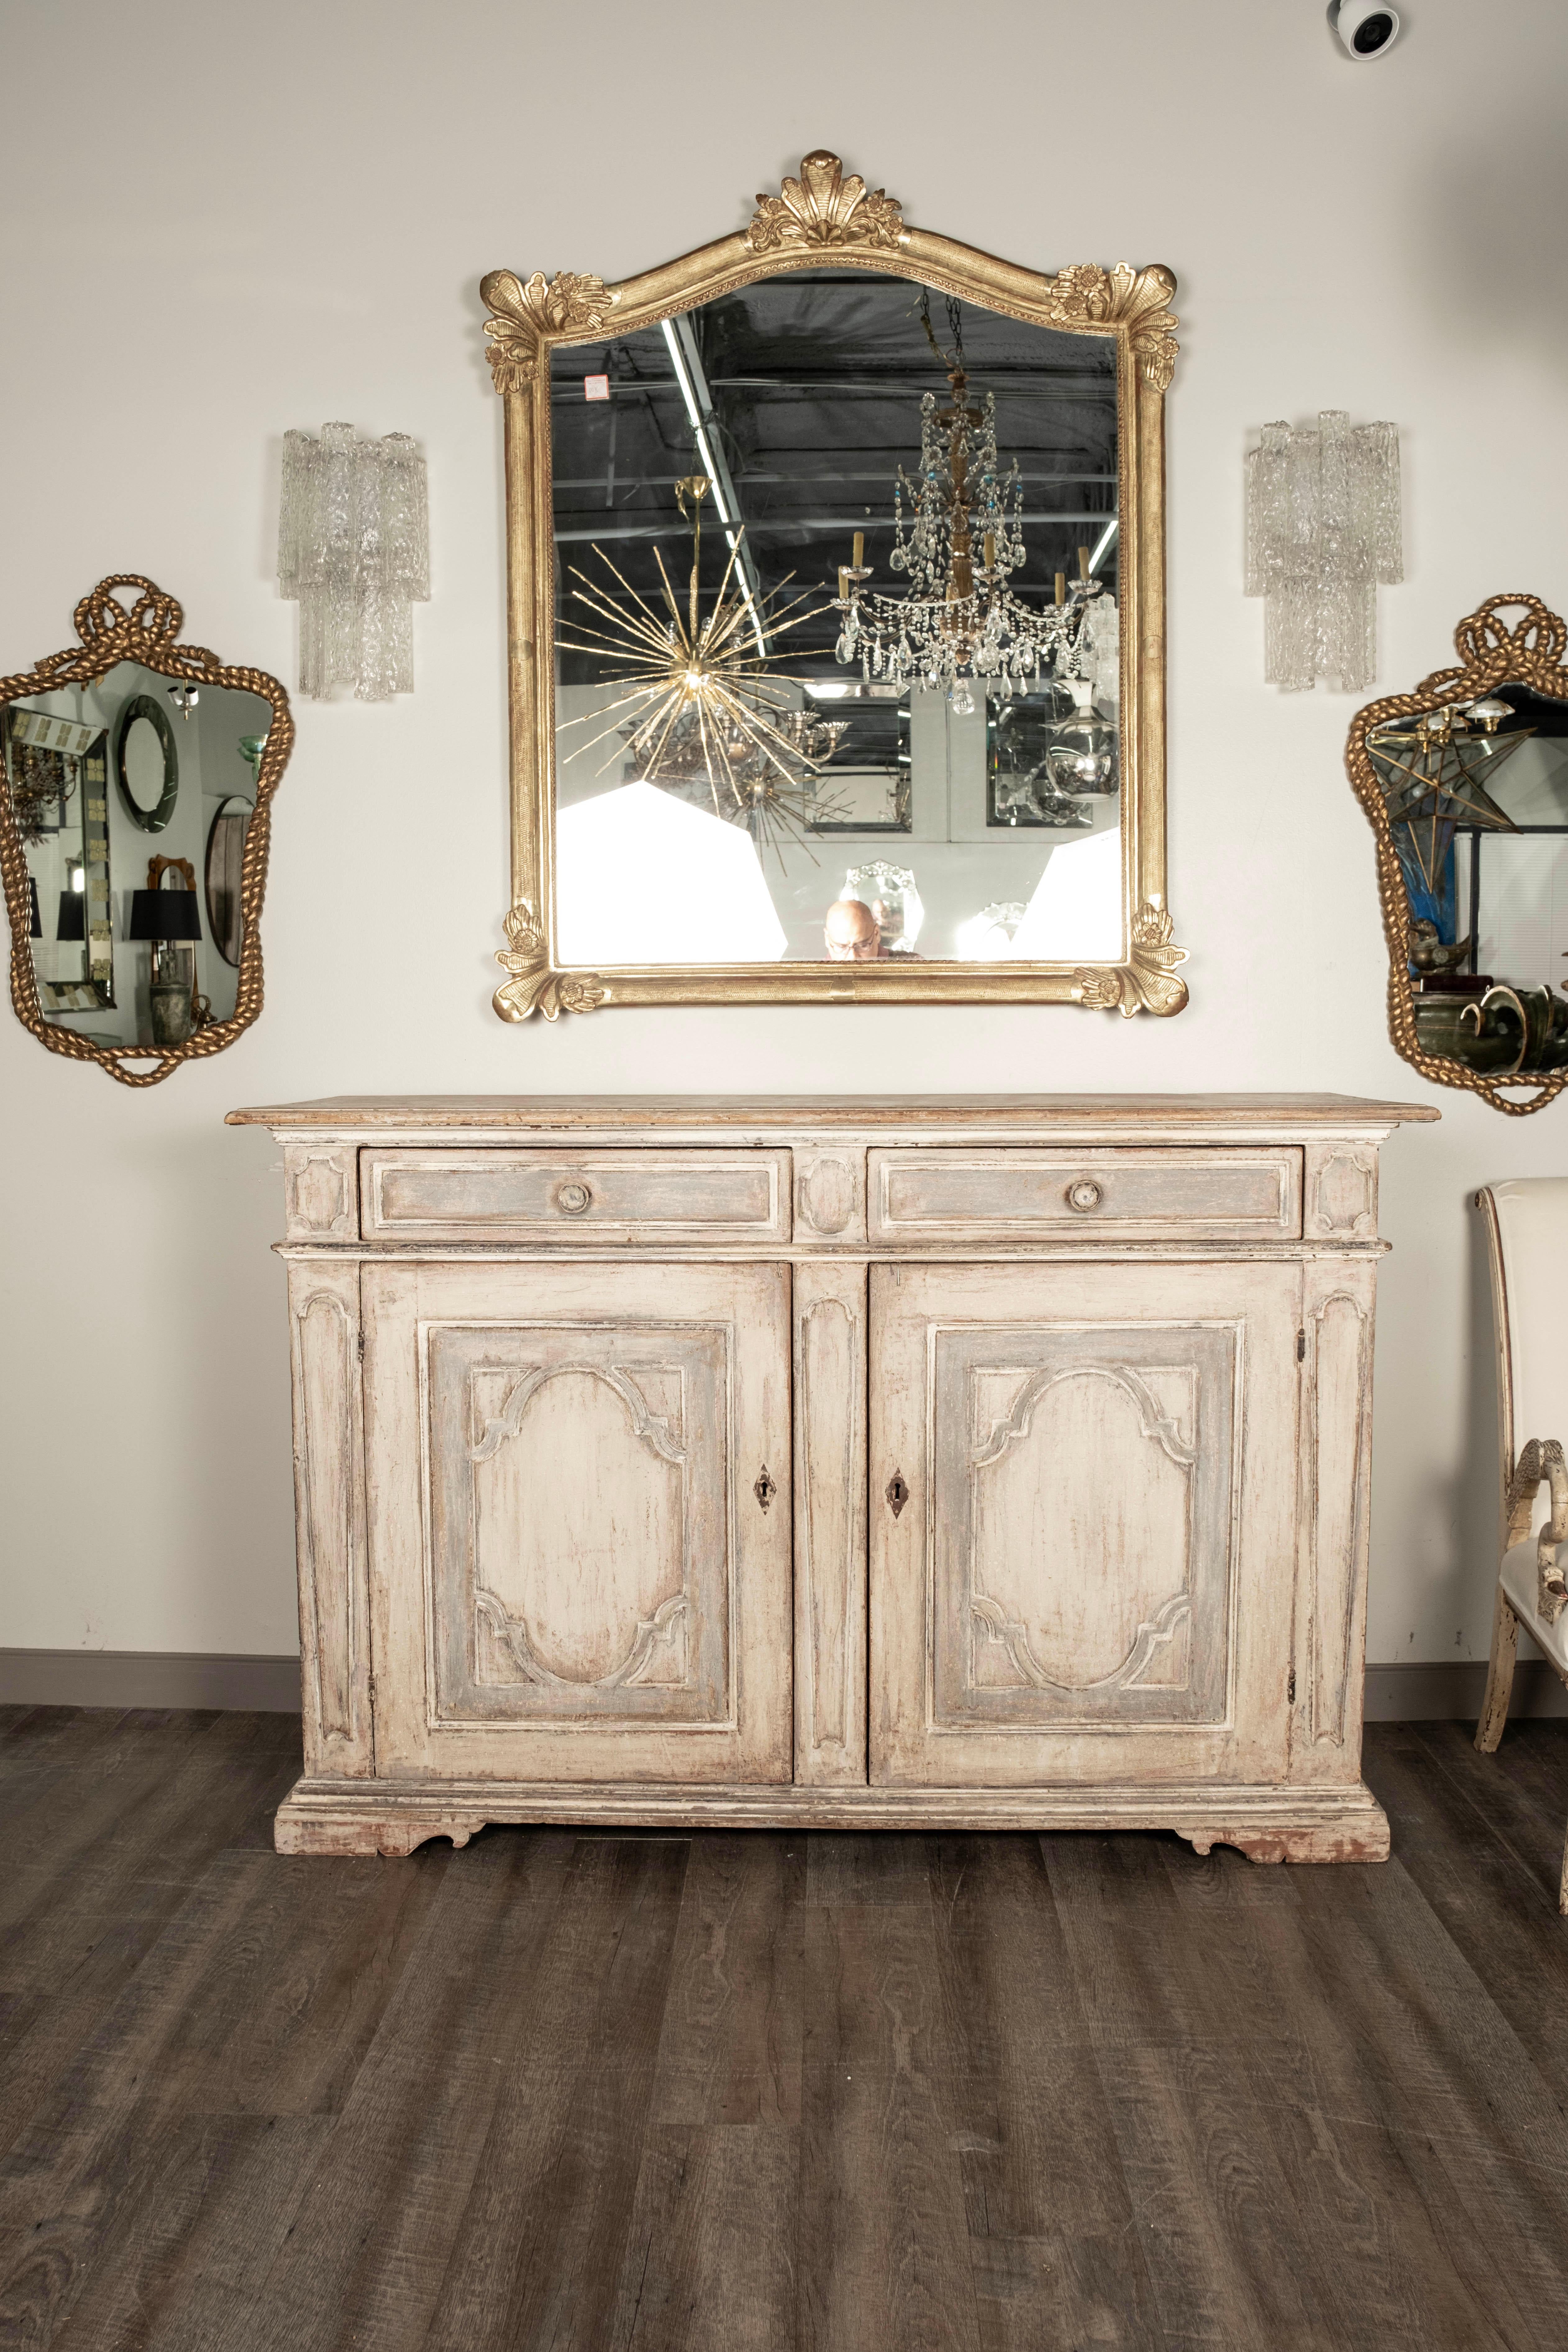 18th Century Tuscan Painted Credenza From Italy.
This lovely 18th century Italian Baroque credenza or sideboard has two cabinet doors below and two drawers above with beautiful distressed paint decorated finish.
This stunning Italian Tuscan credenza